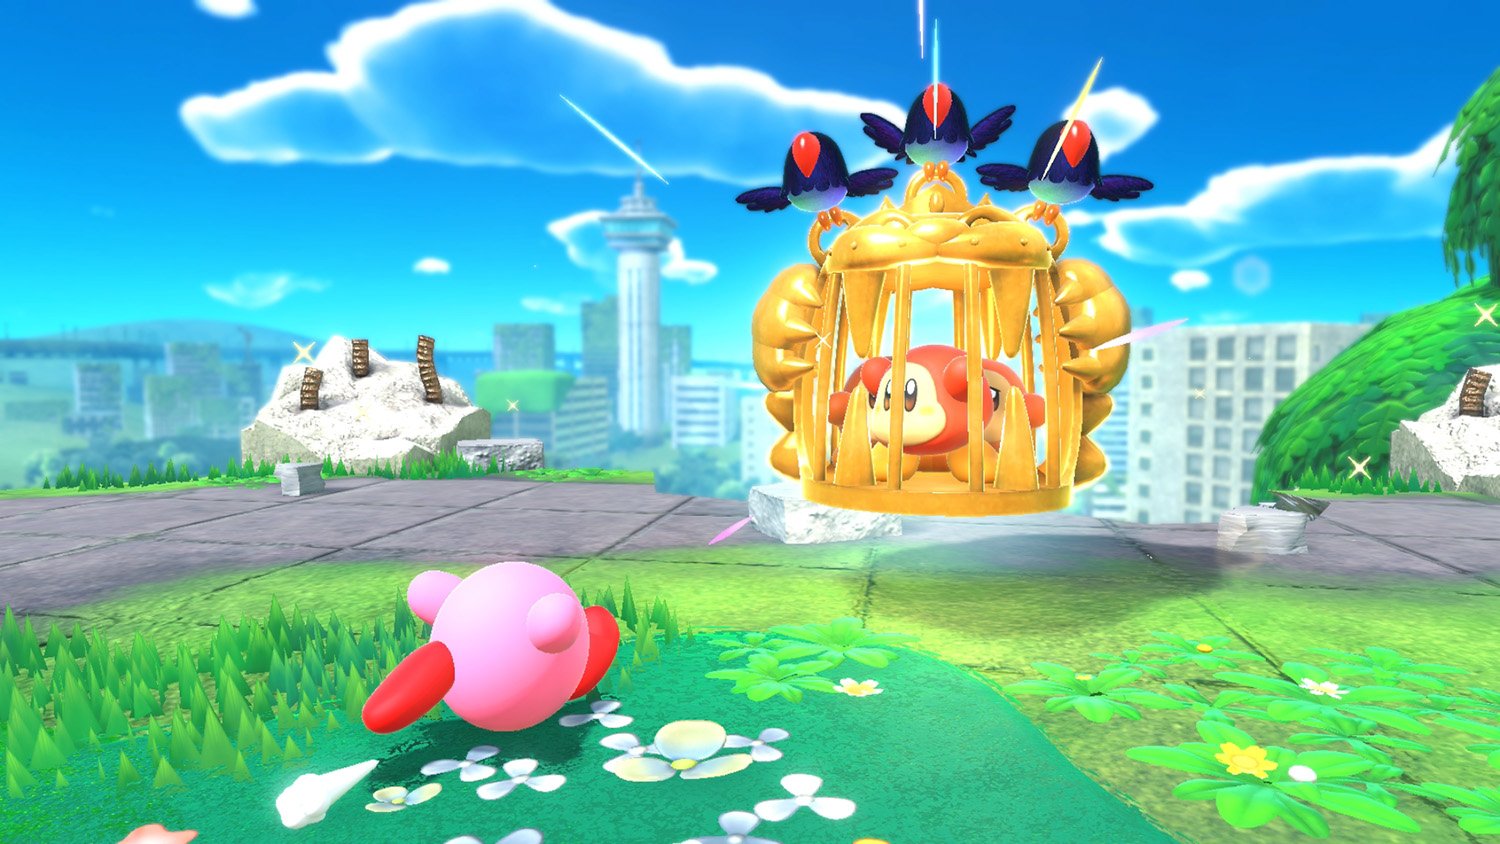 The best Kirby games to adventure through